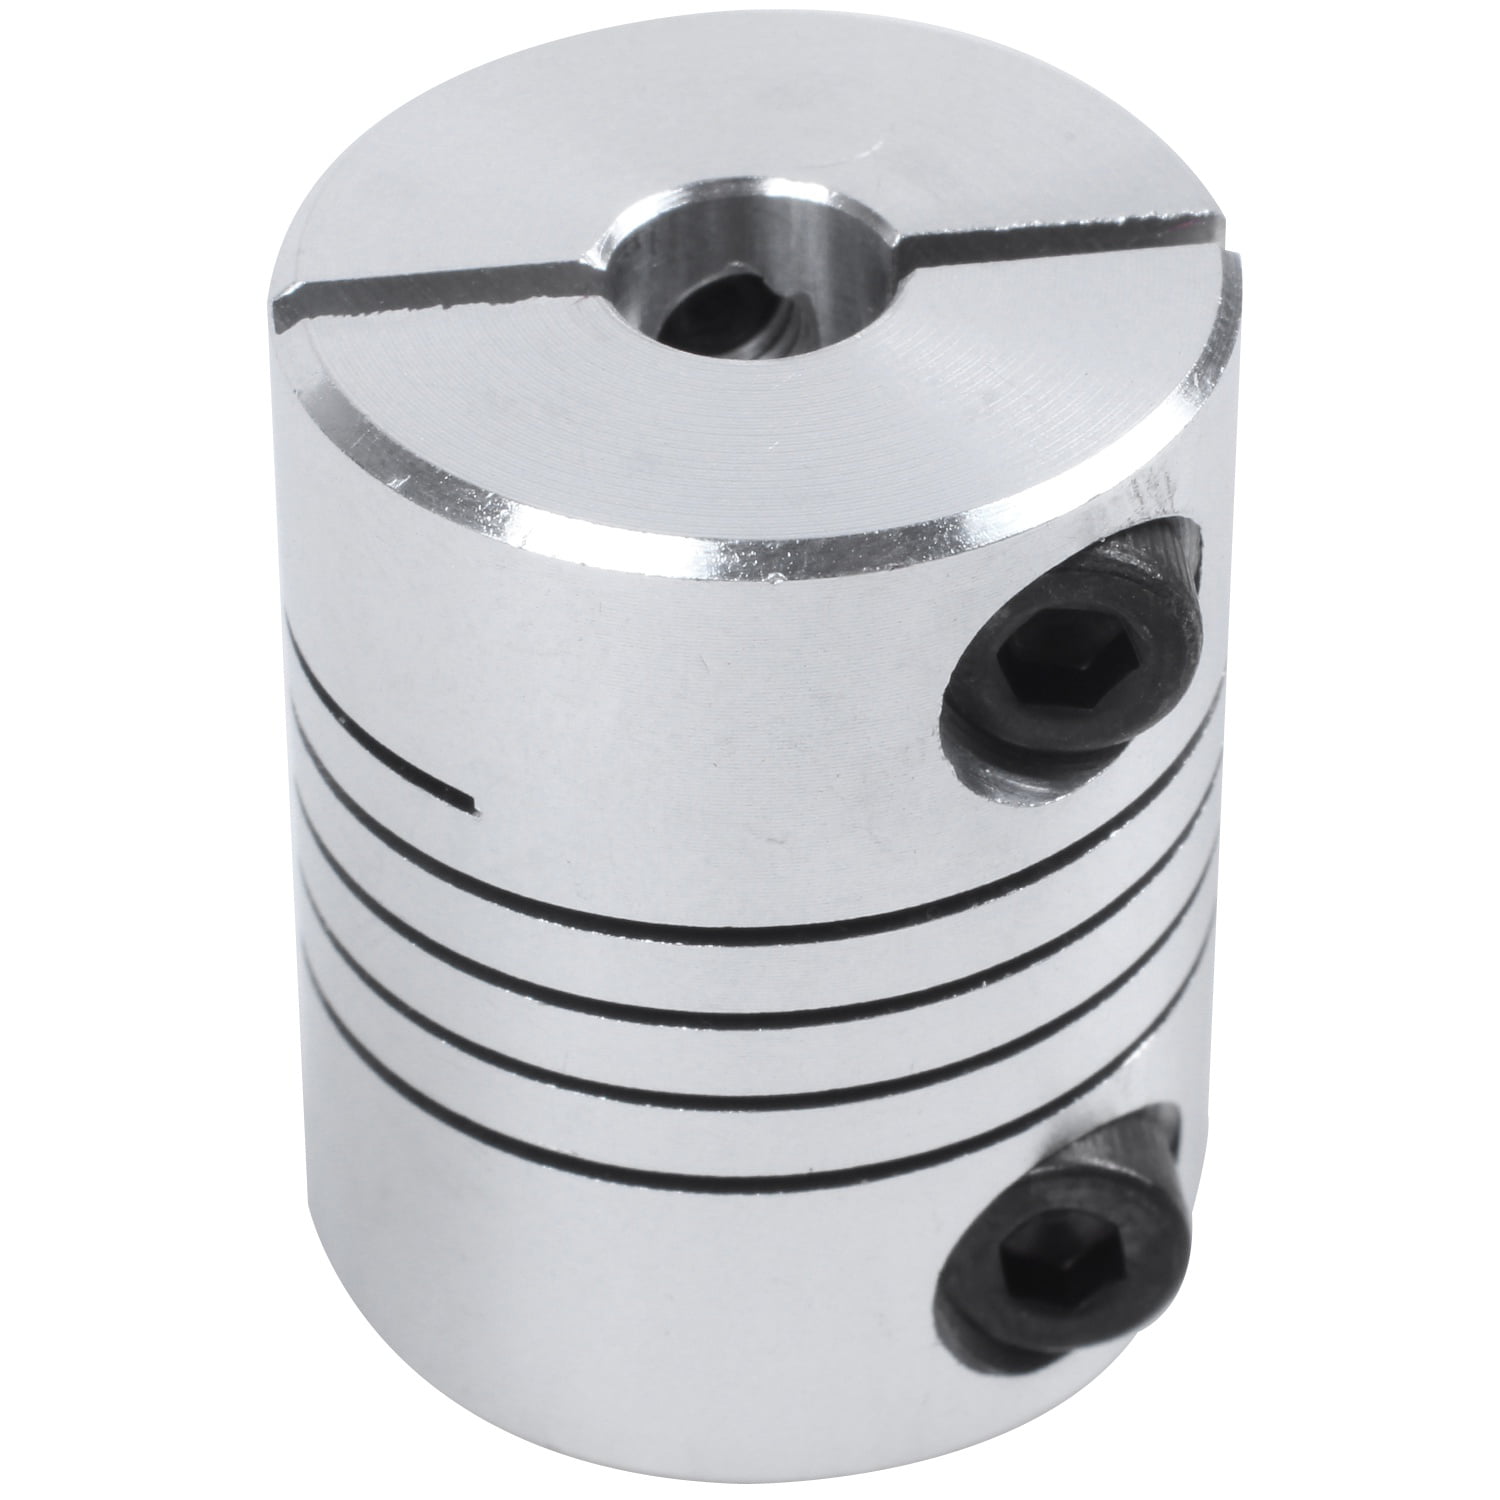 Tulead CNC Motor Couping 6 x 6mm Dia Aluminum Silver Shaft Stepper Coupler Pack of 2 with Wrench 